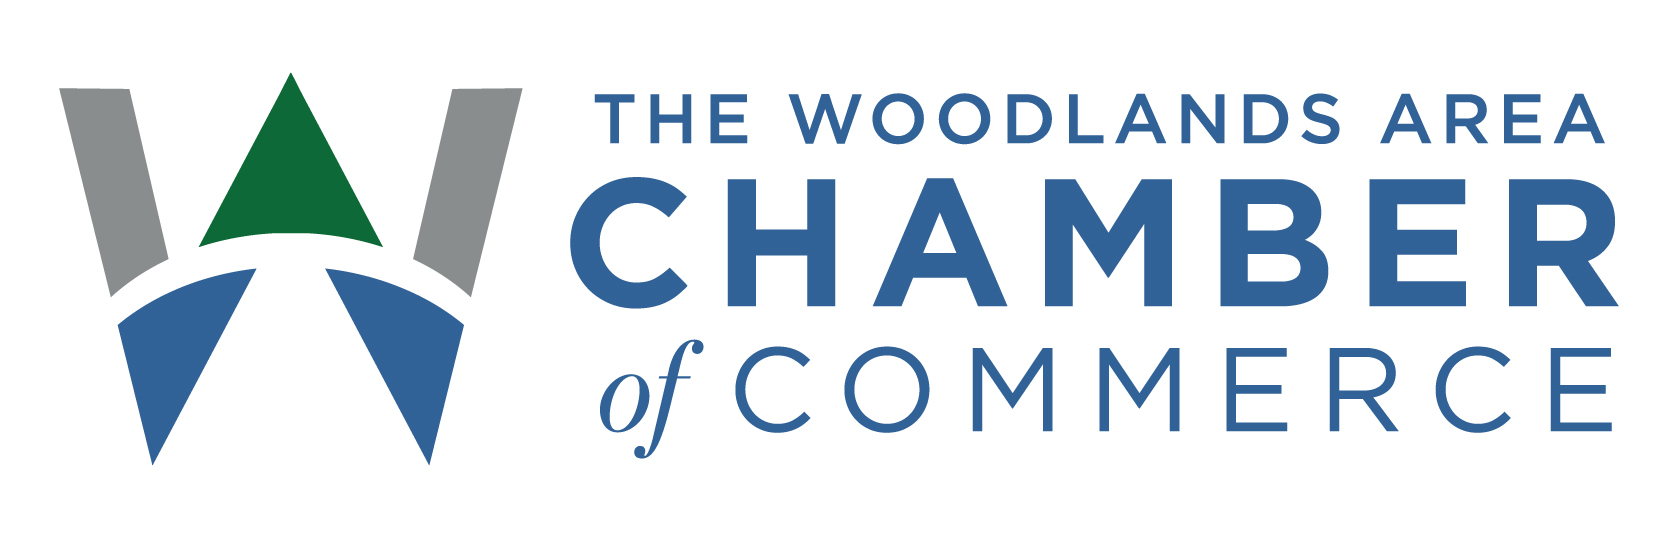 Woodlands Area Chamber of Commerce